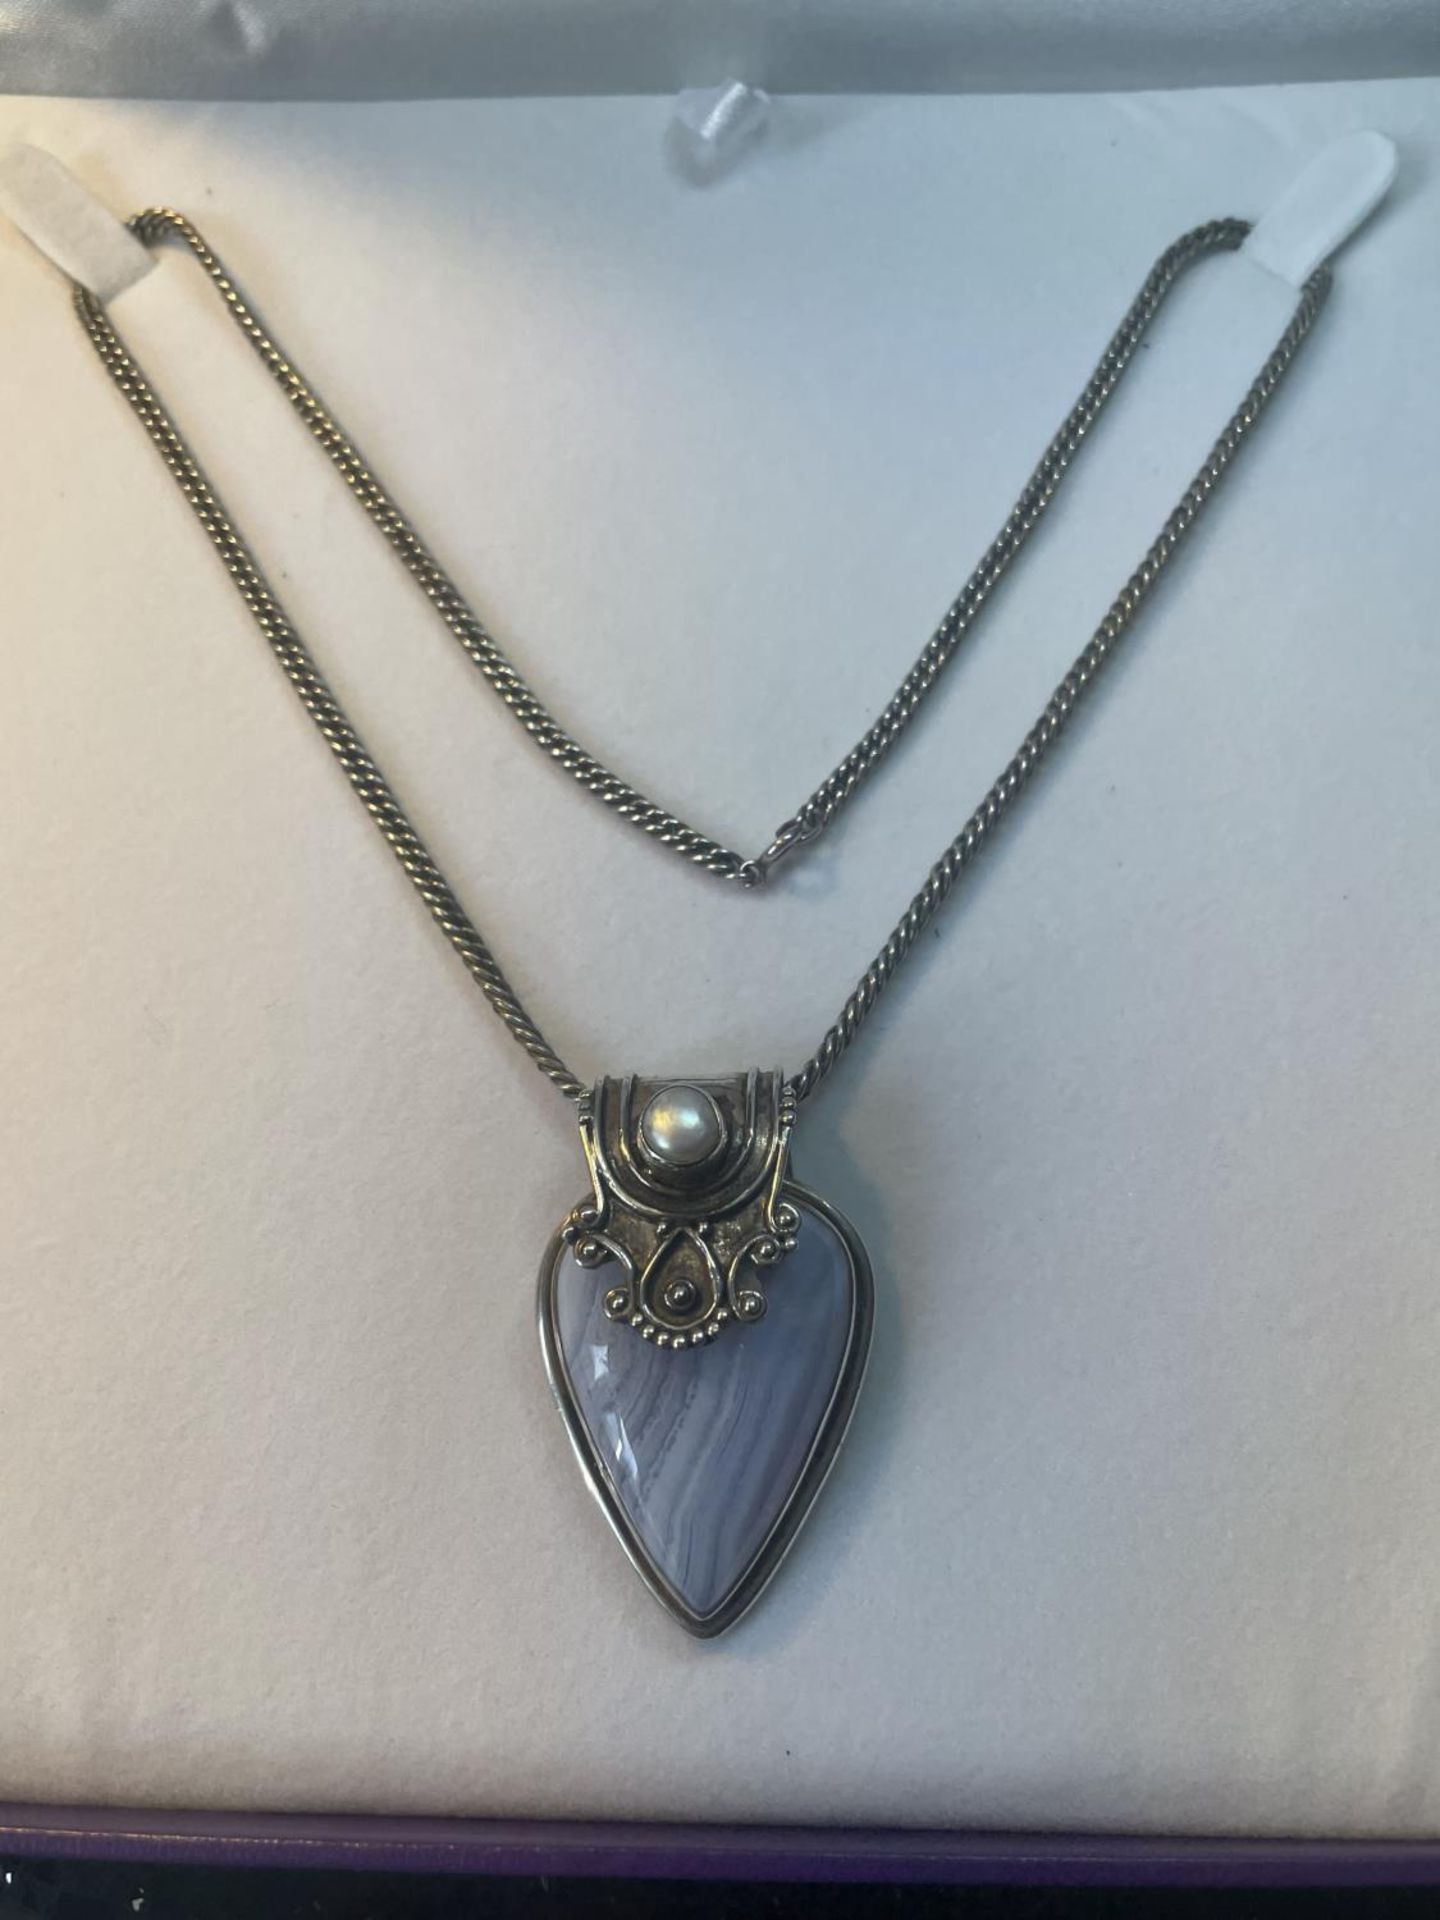 A MARKED SILVER NECKLACE WITH AN ORNATE FRAMED BLUE STONE PENDANT